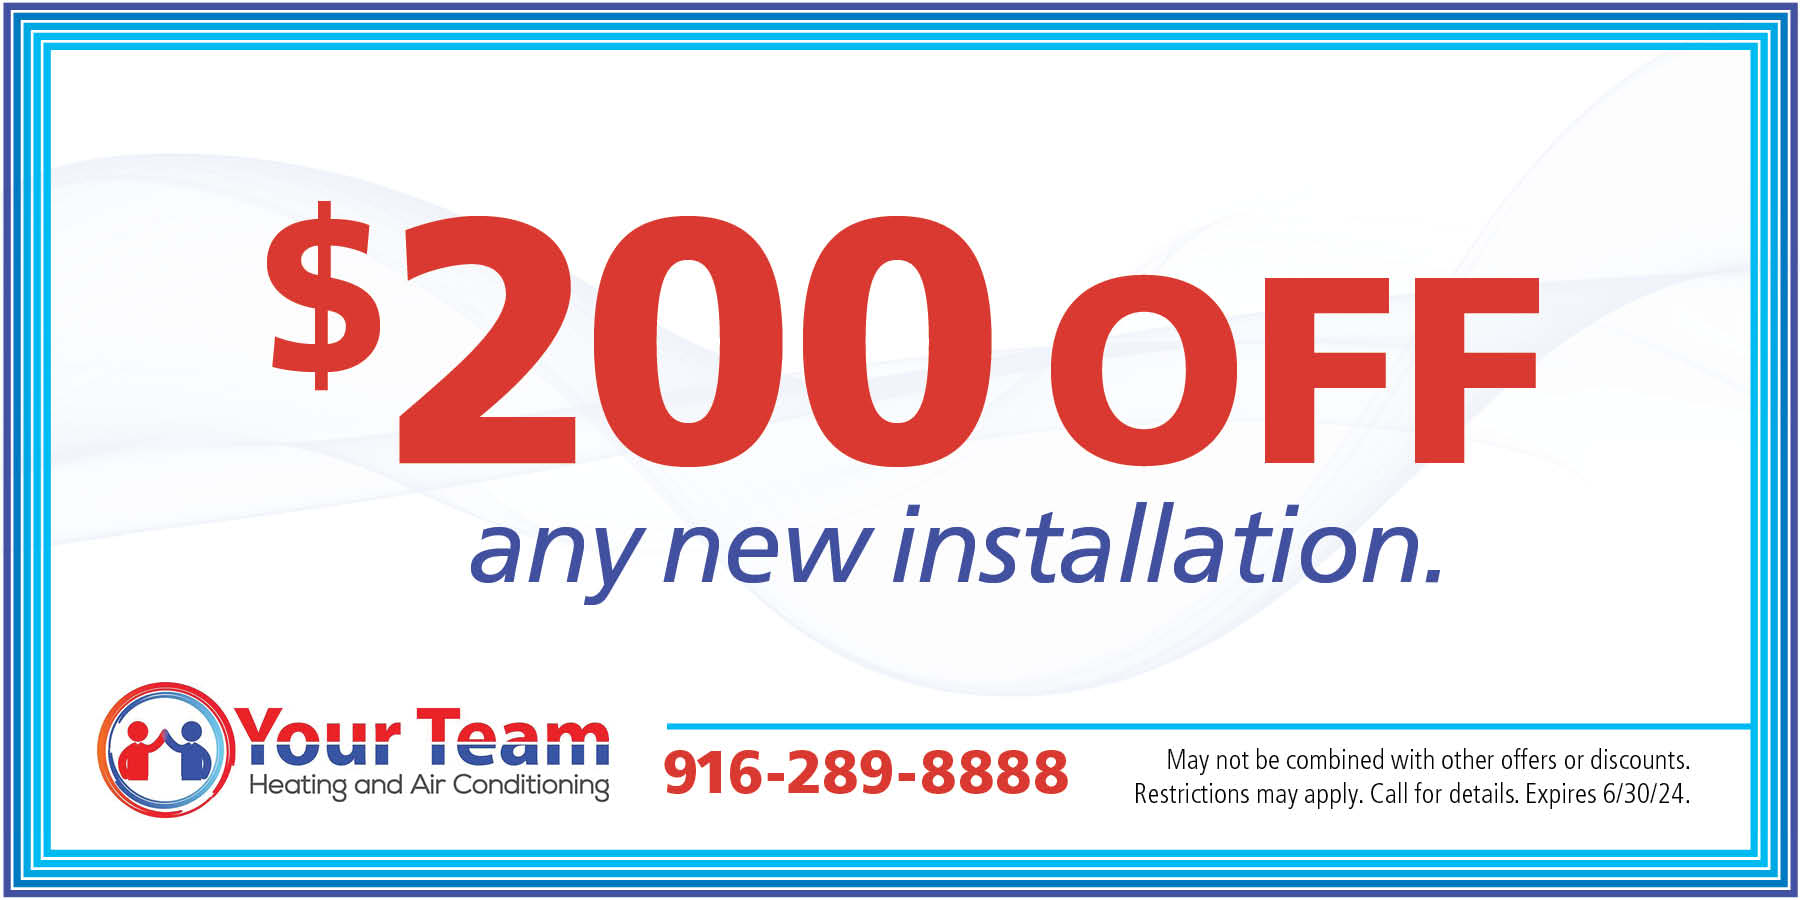 $200 off any new installation.